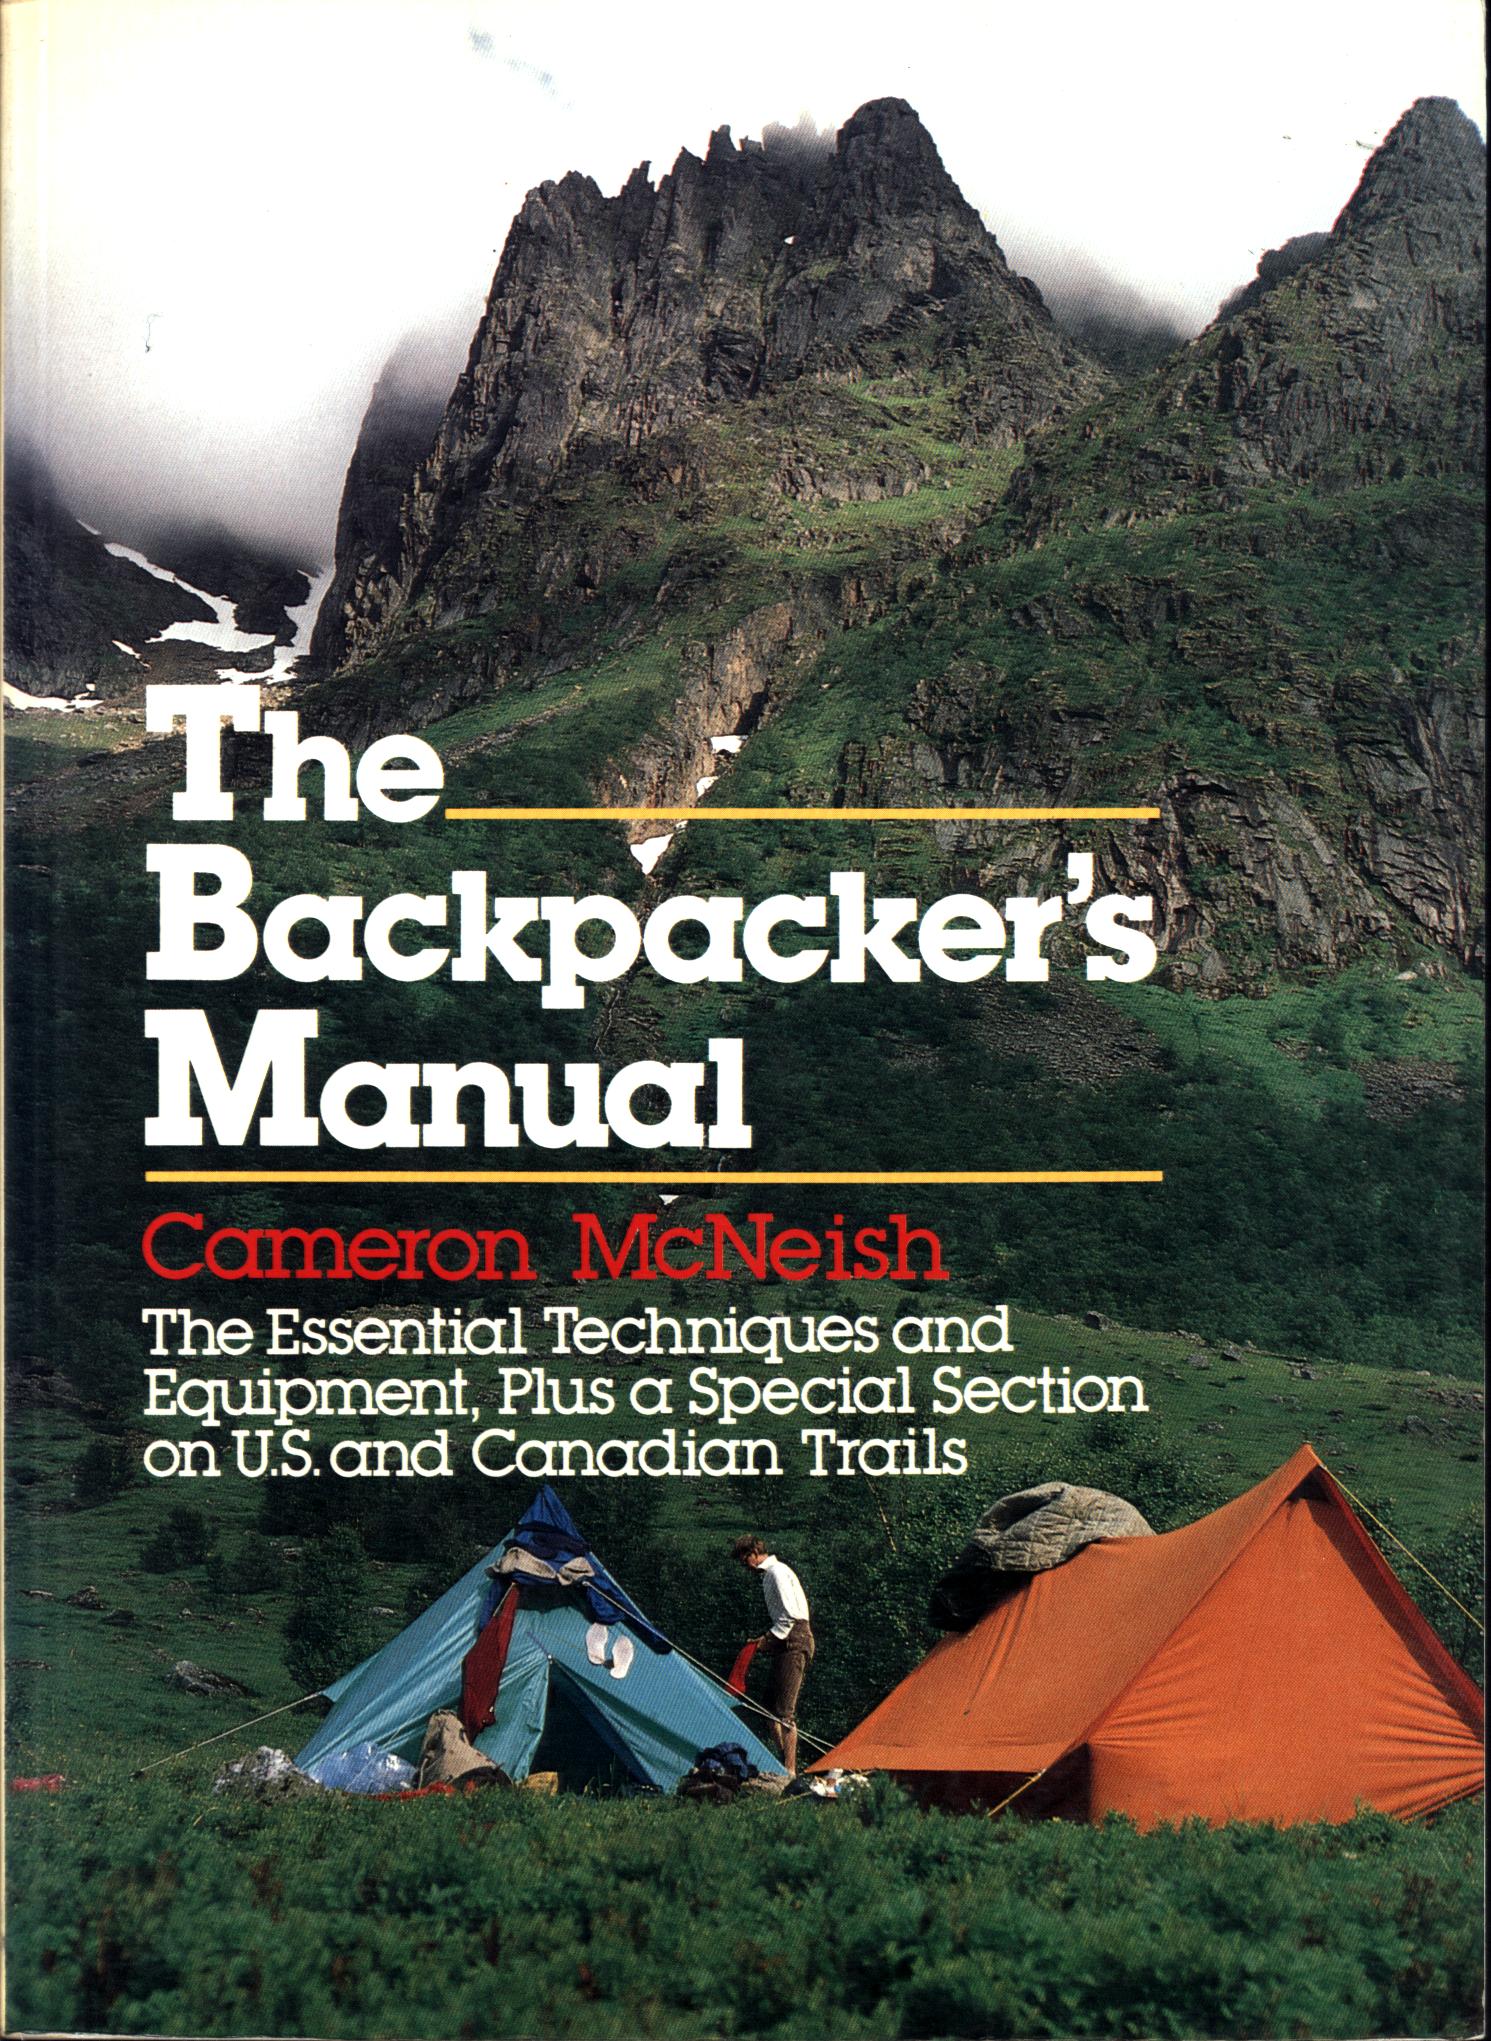 THE BACKPACKER'S MANUAL: the essential technqiues and equipment.